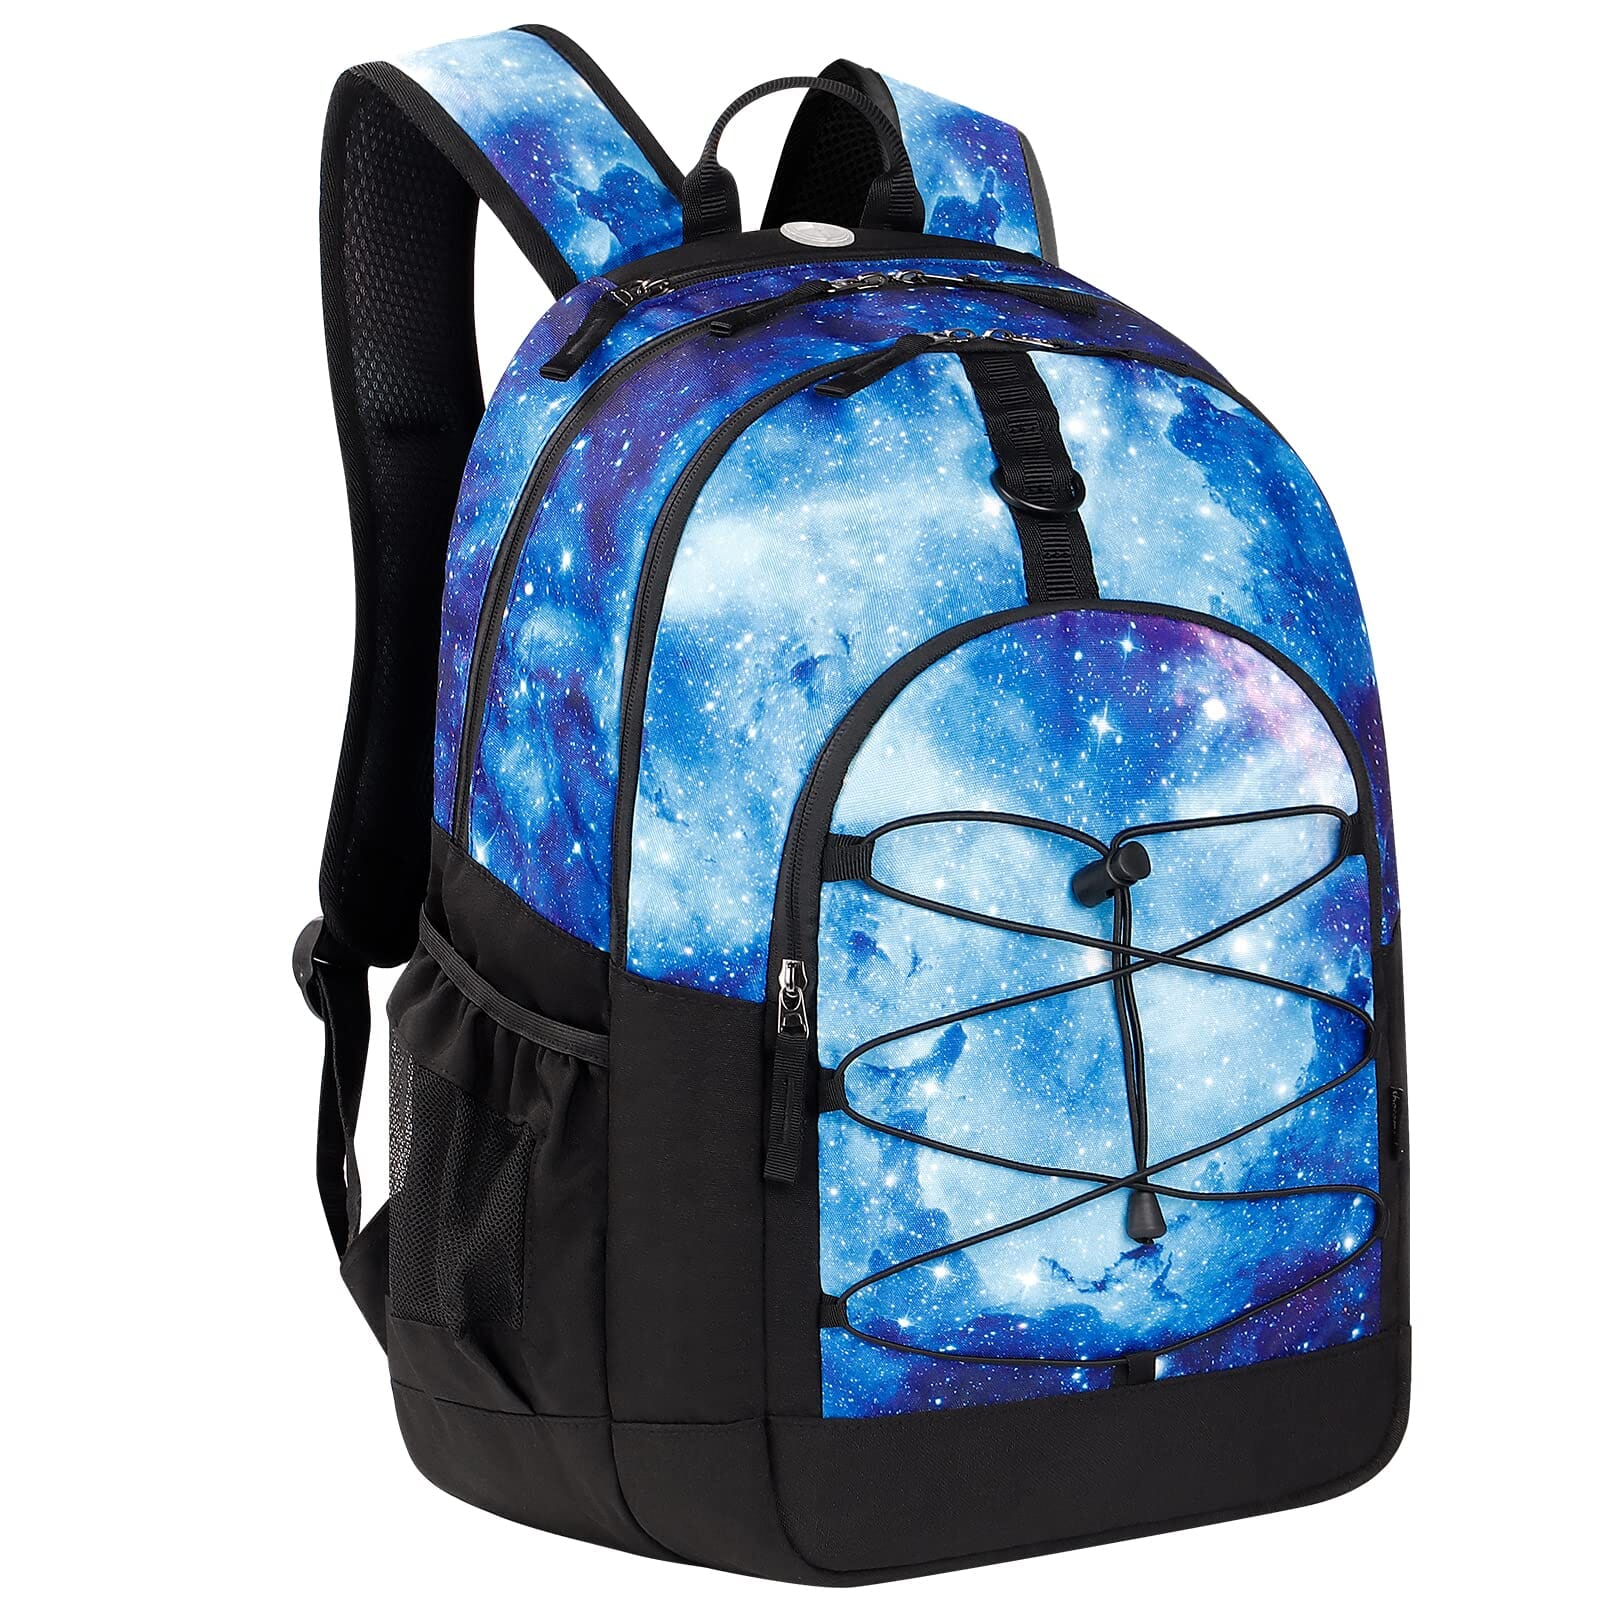 Choco Mocha Boys Galaxy Backpack for Elementary Middle School, Blue Large Backpack for Kids Teen Boys, 18 Inch chocomochakids 